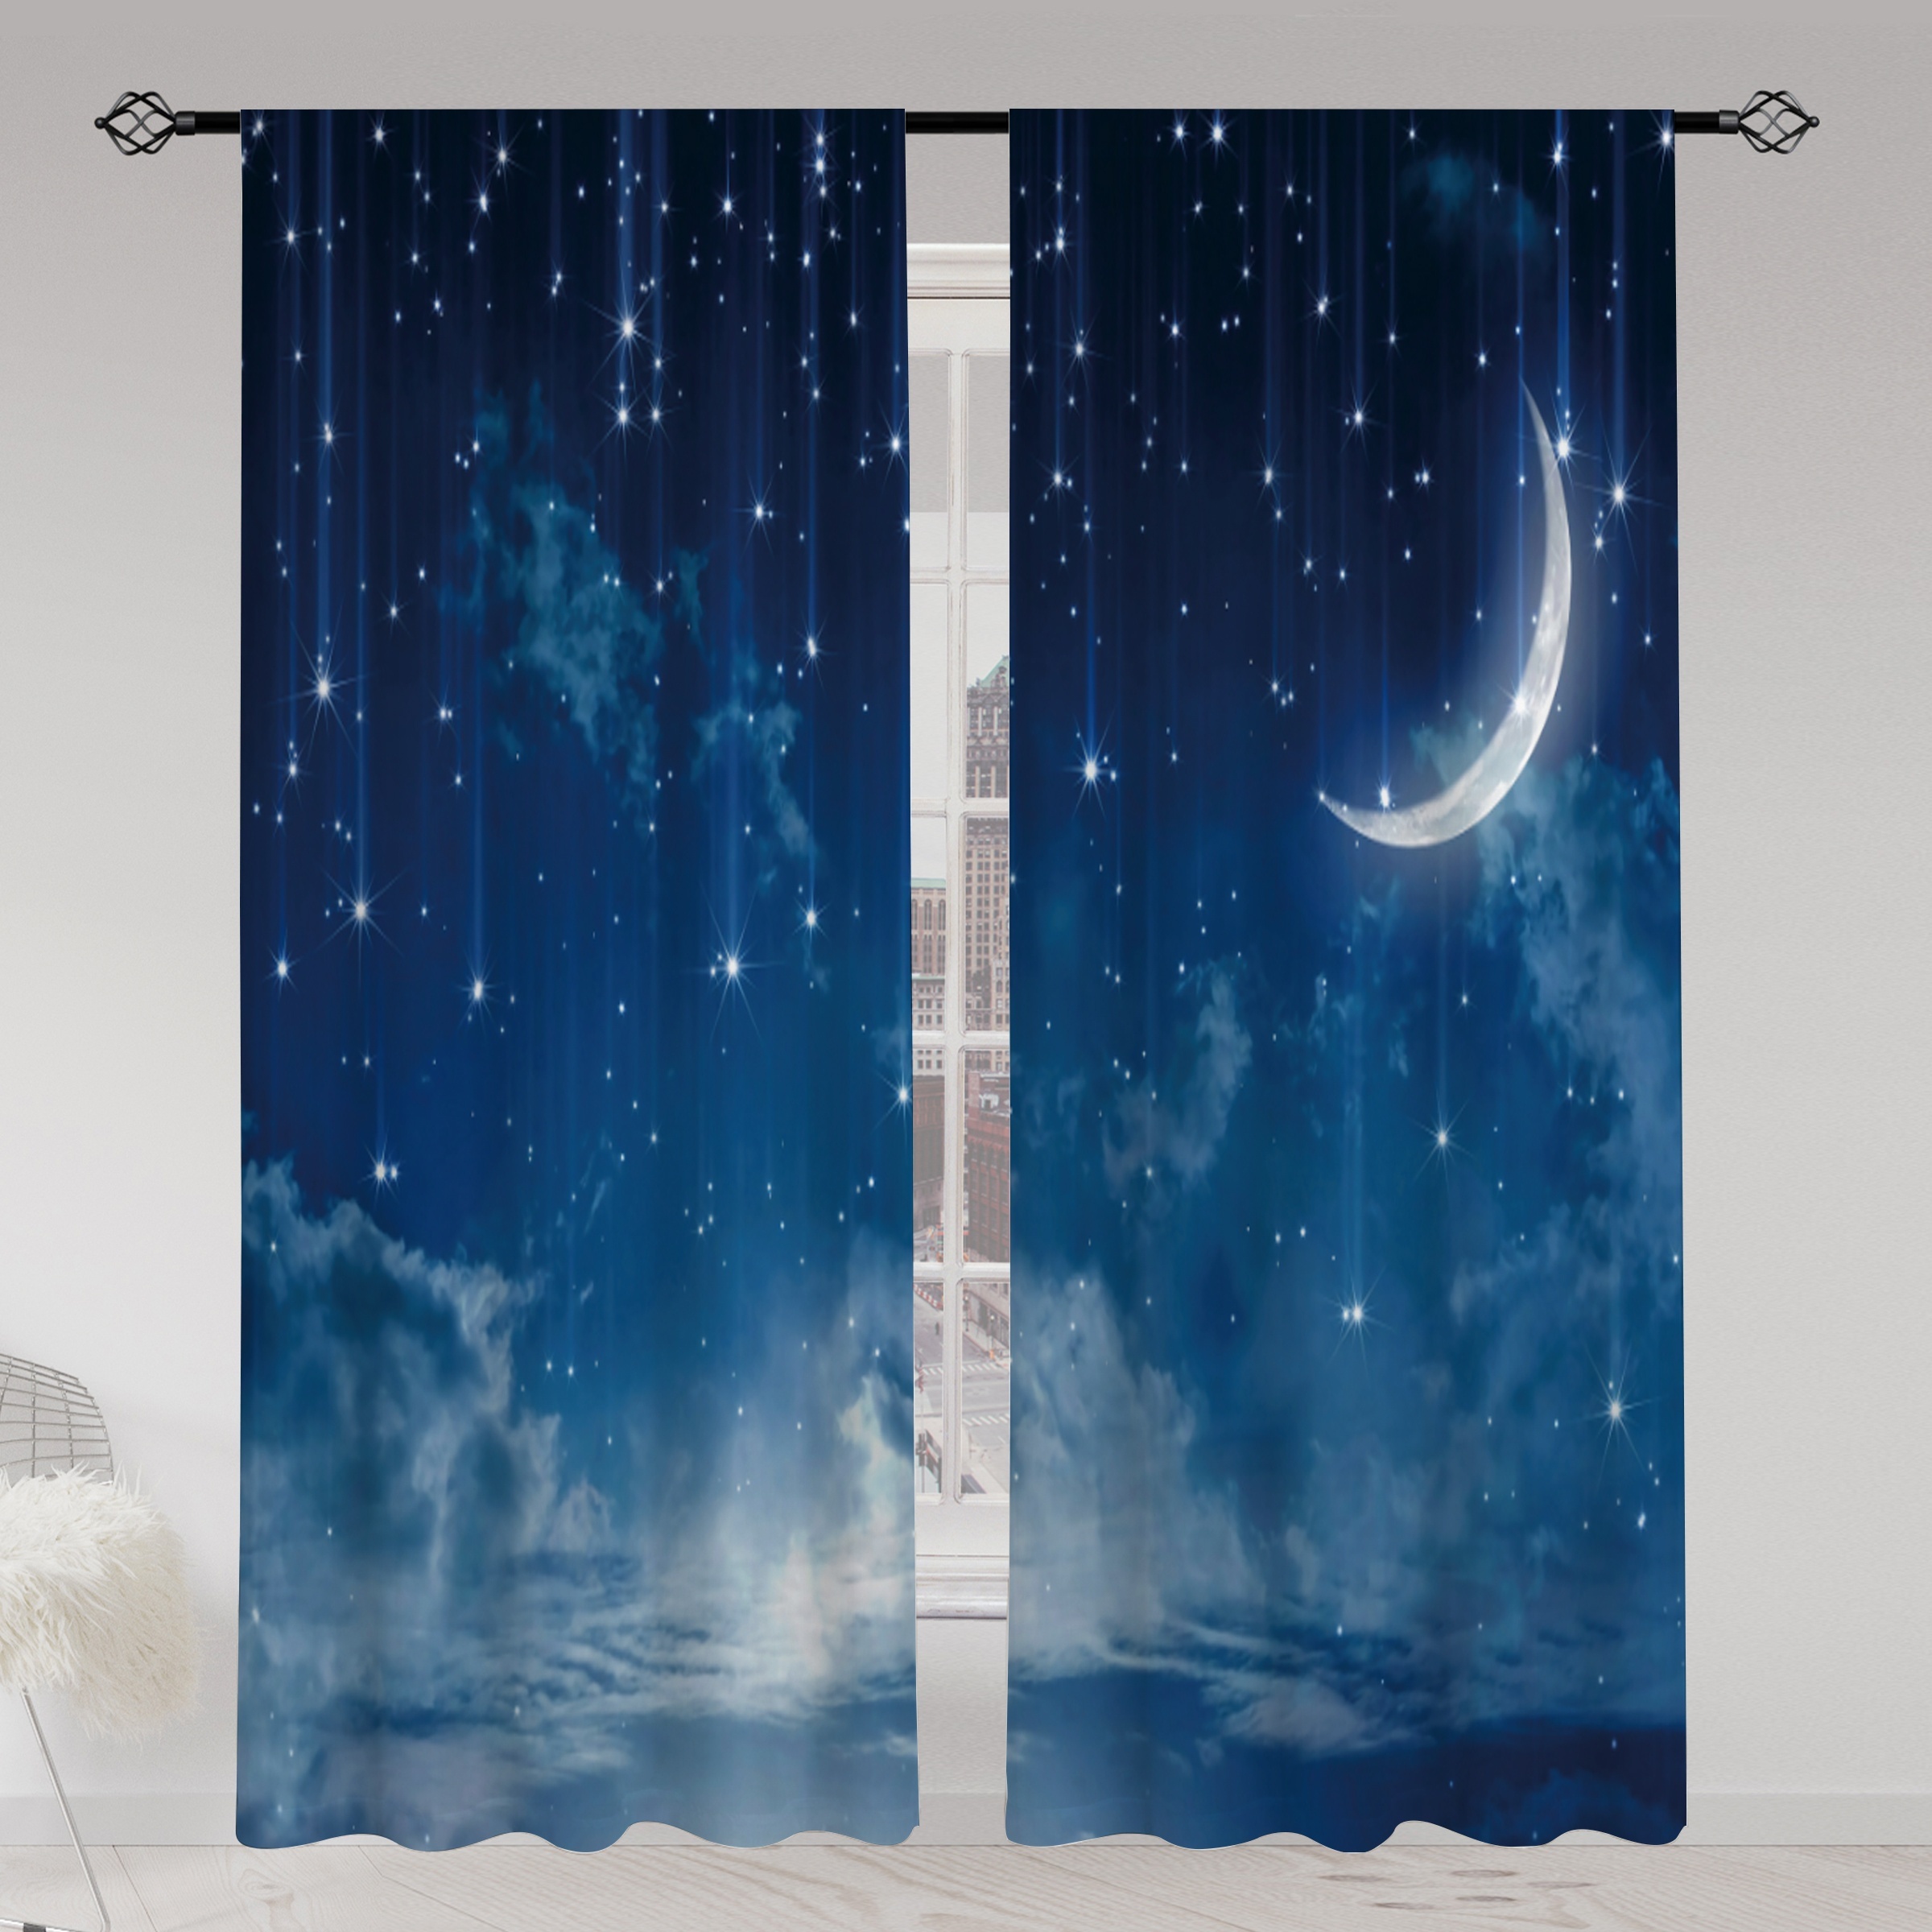 

2pcs, Flow Star Empty Printed Translucent Curtains, Multi-scene Polyester Rod Pocket Curtain For Living Room Game Room Bedroom Home Decor Party Supplies